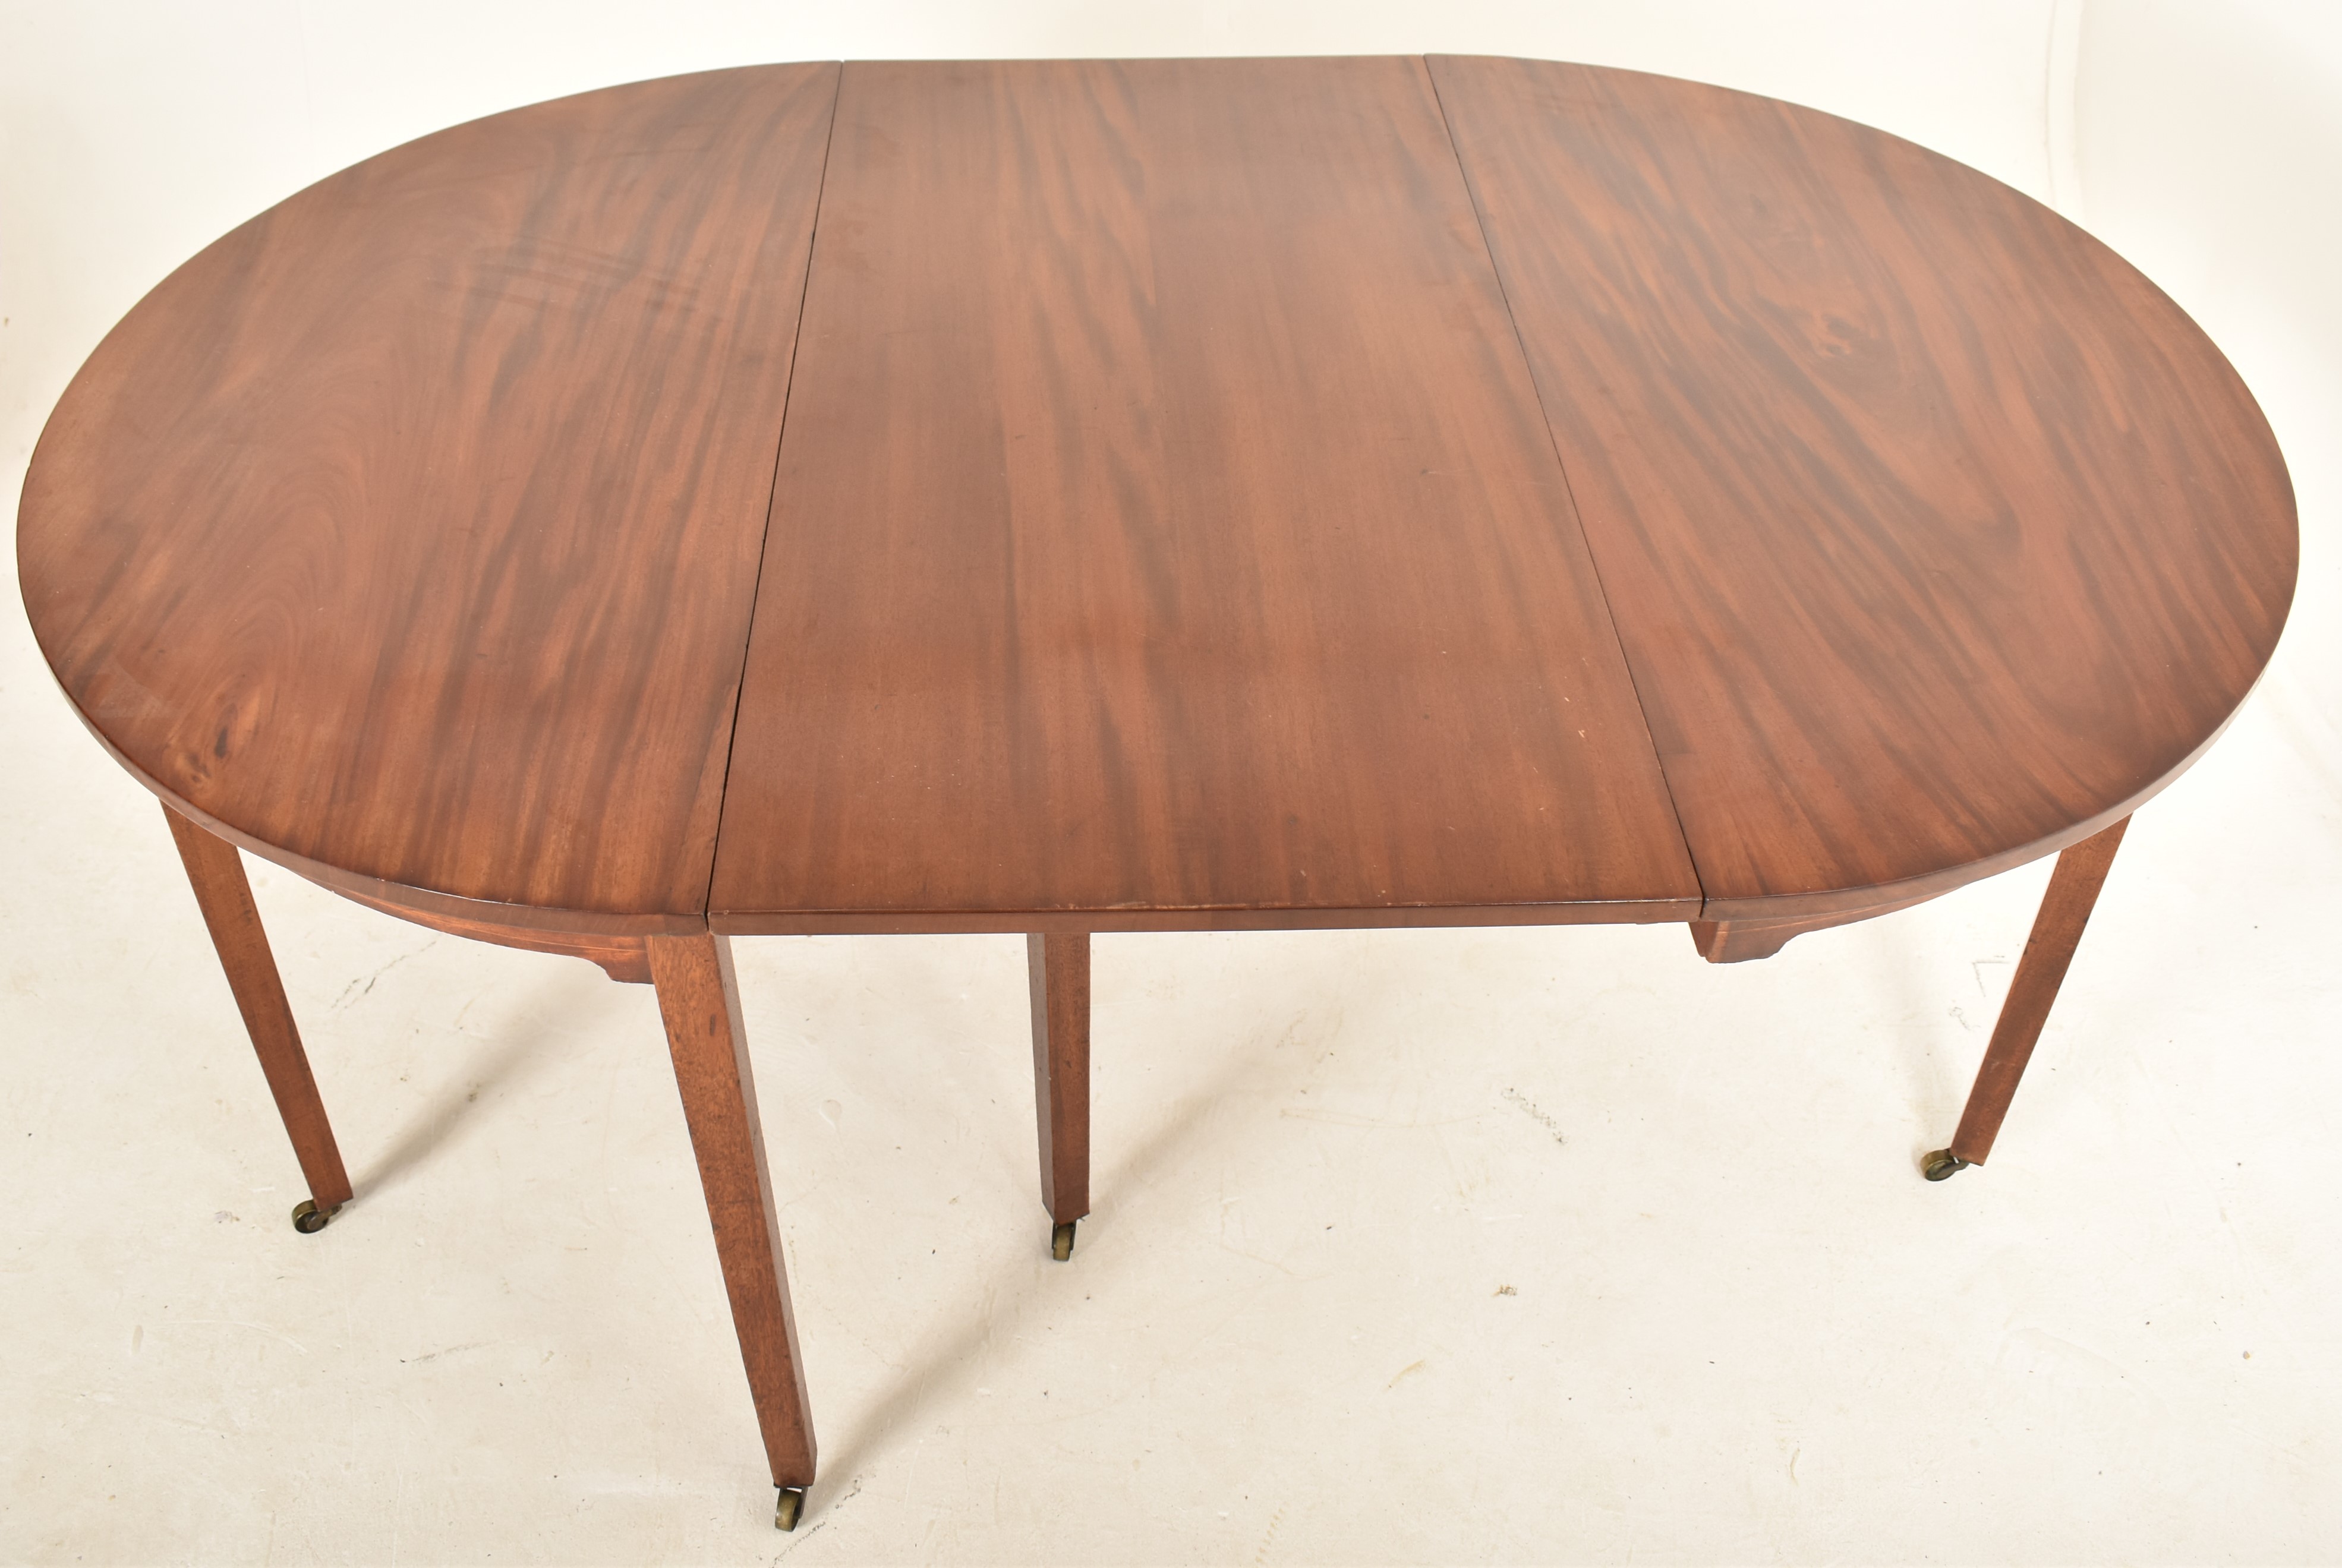 GEORGE III FIGURED MAHOGANY SECTIONAL DINING TABLE - Image 2 of 5